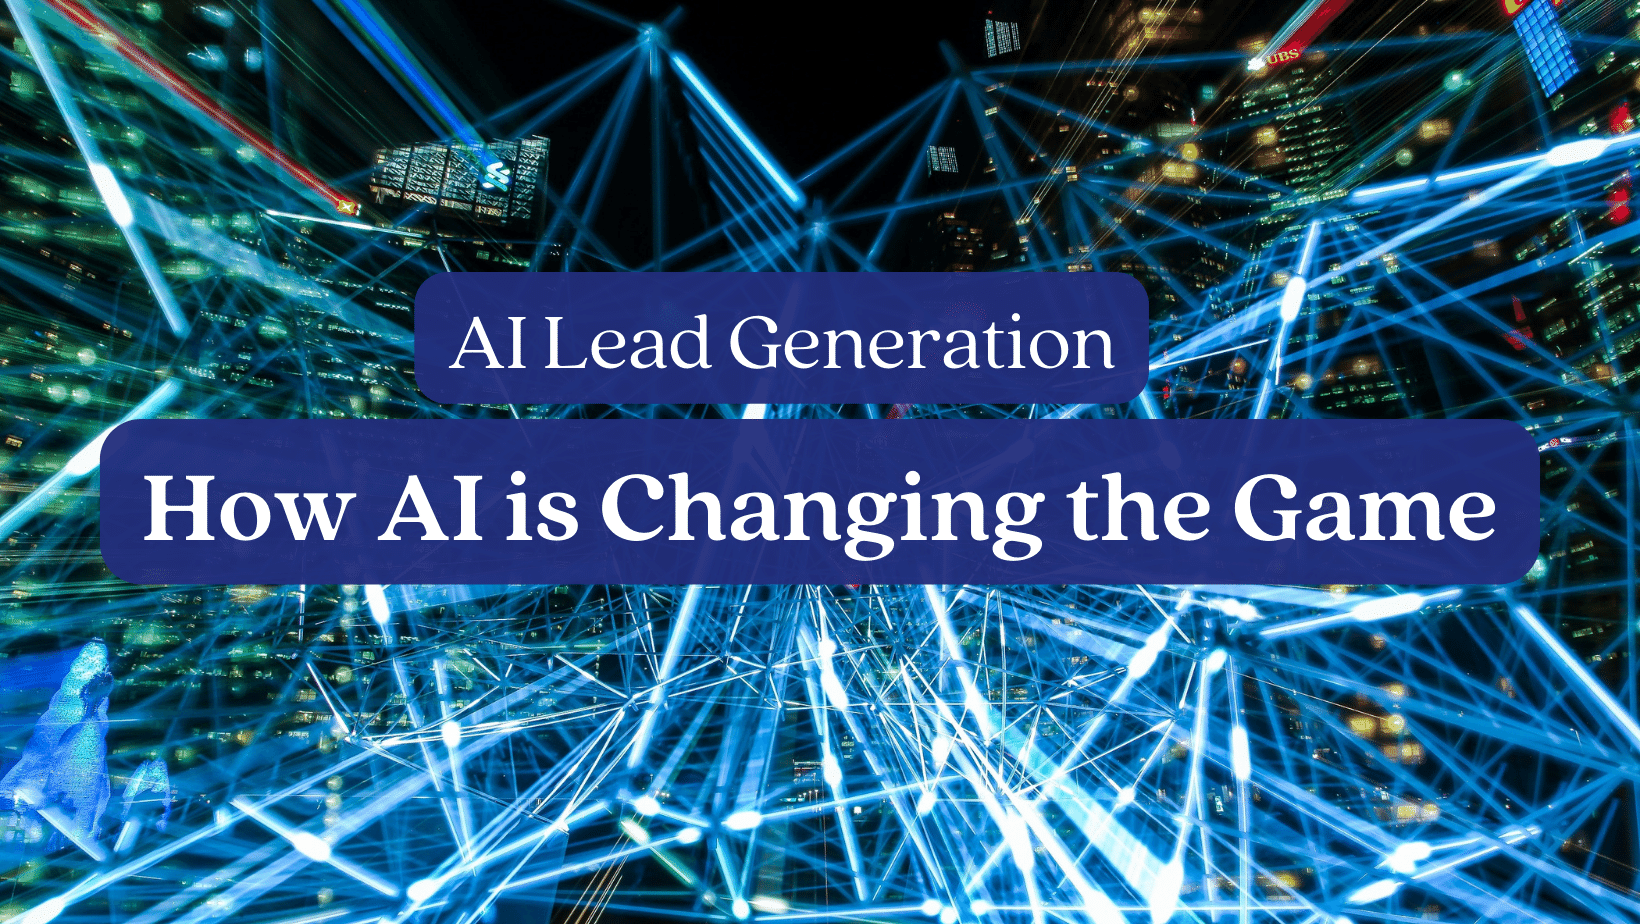 AI Lead Generation: How AI is Changing the Game